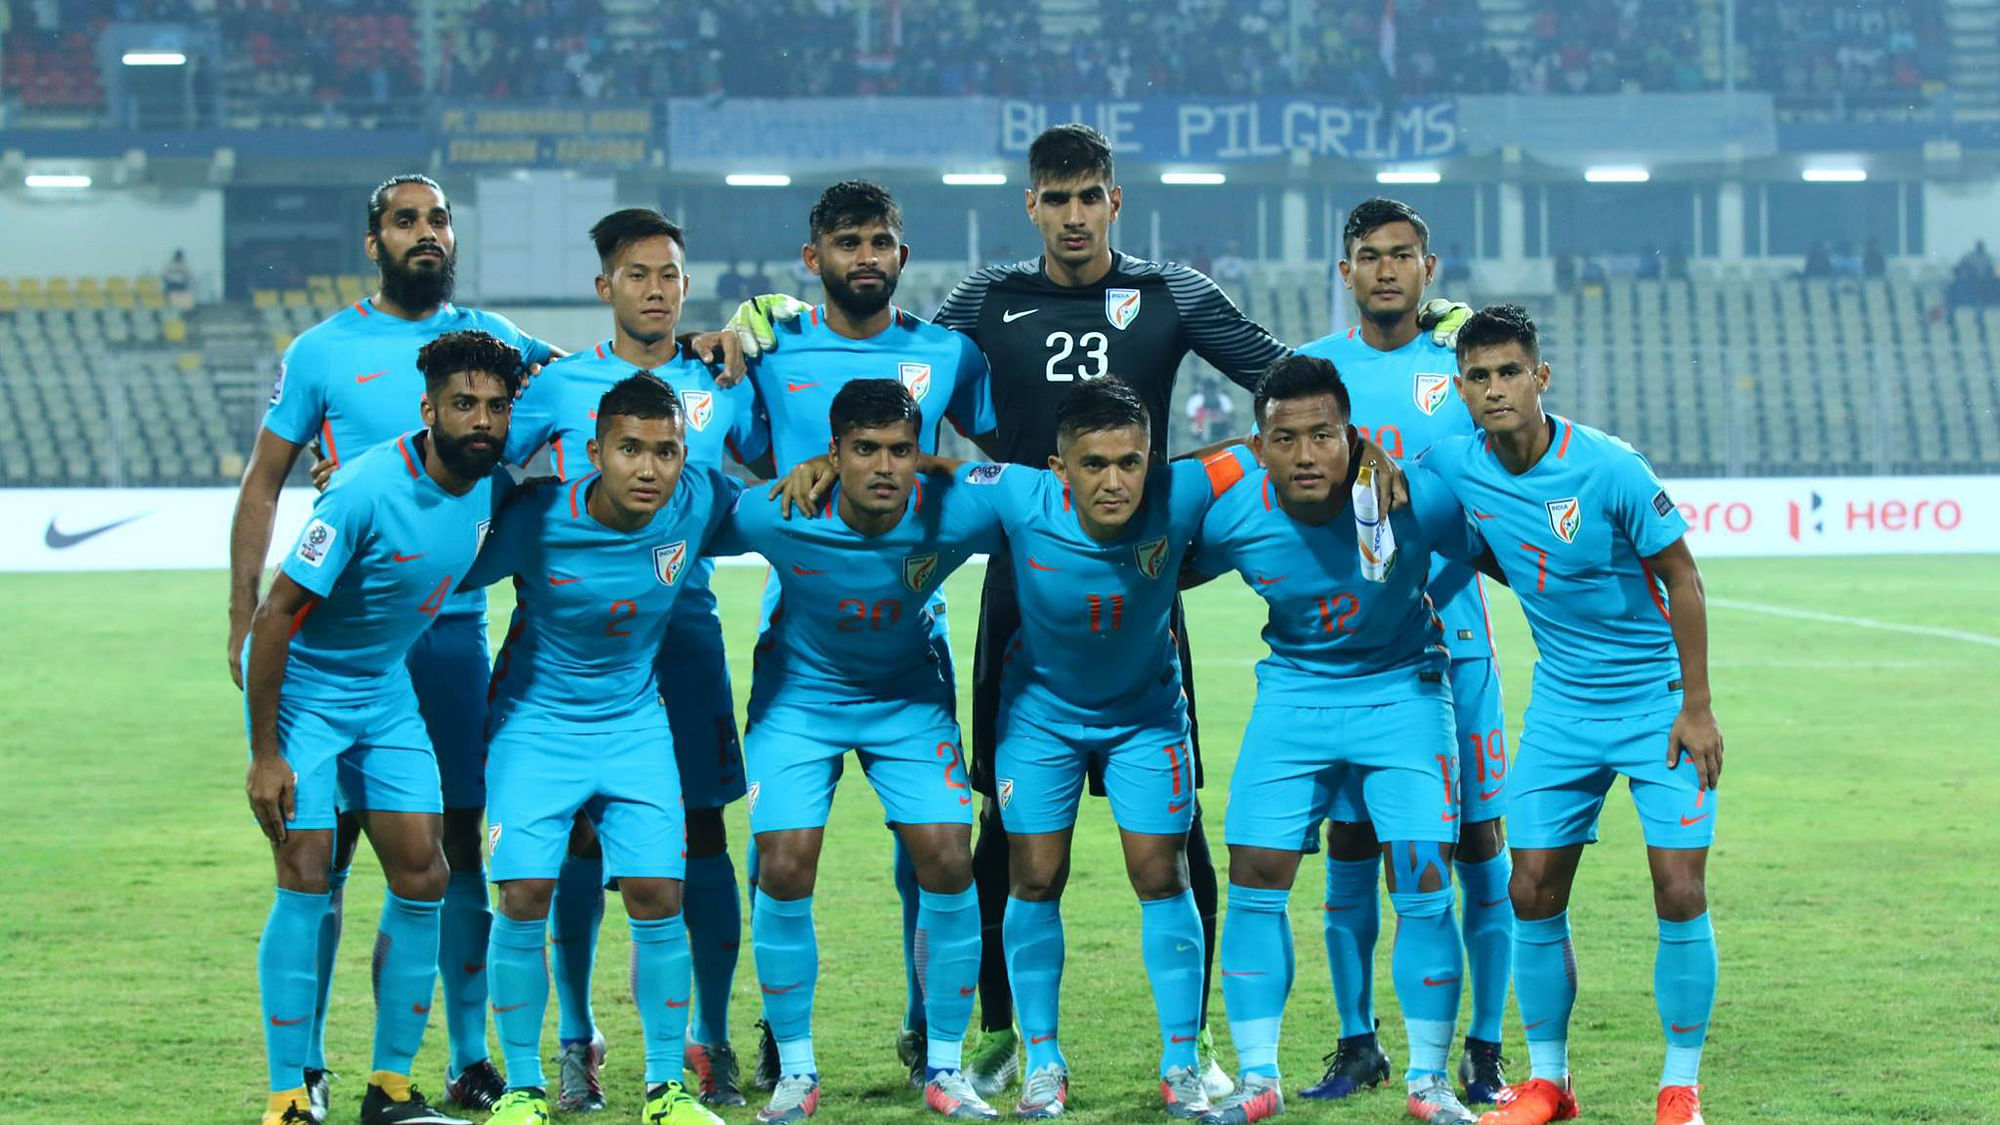 The Indian team stand for a picture before the start of the match.&nbsp;